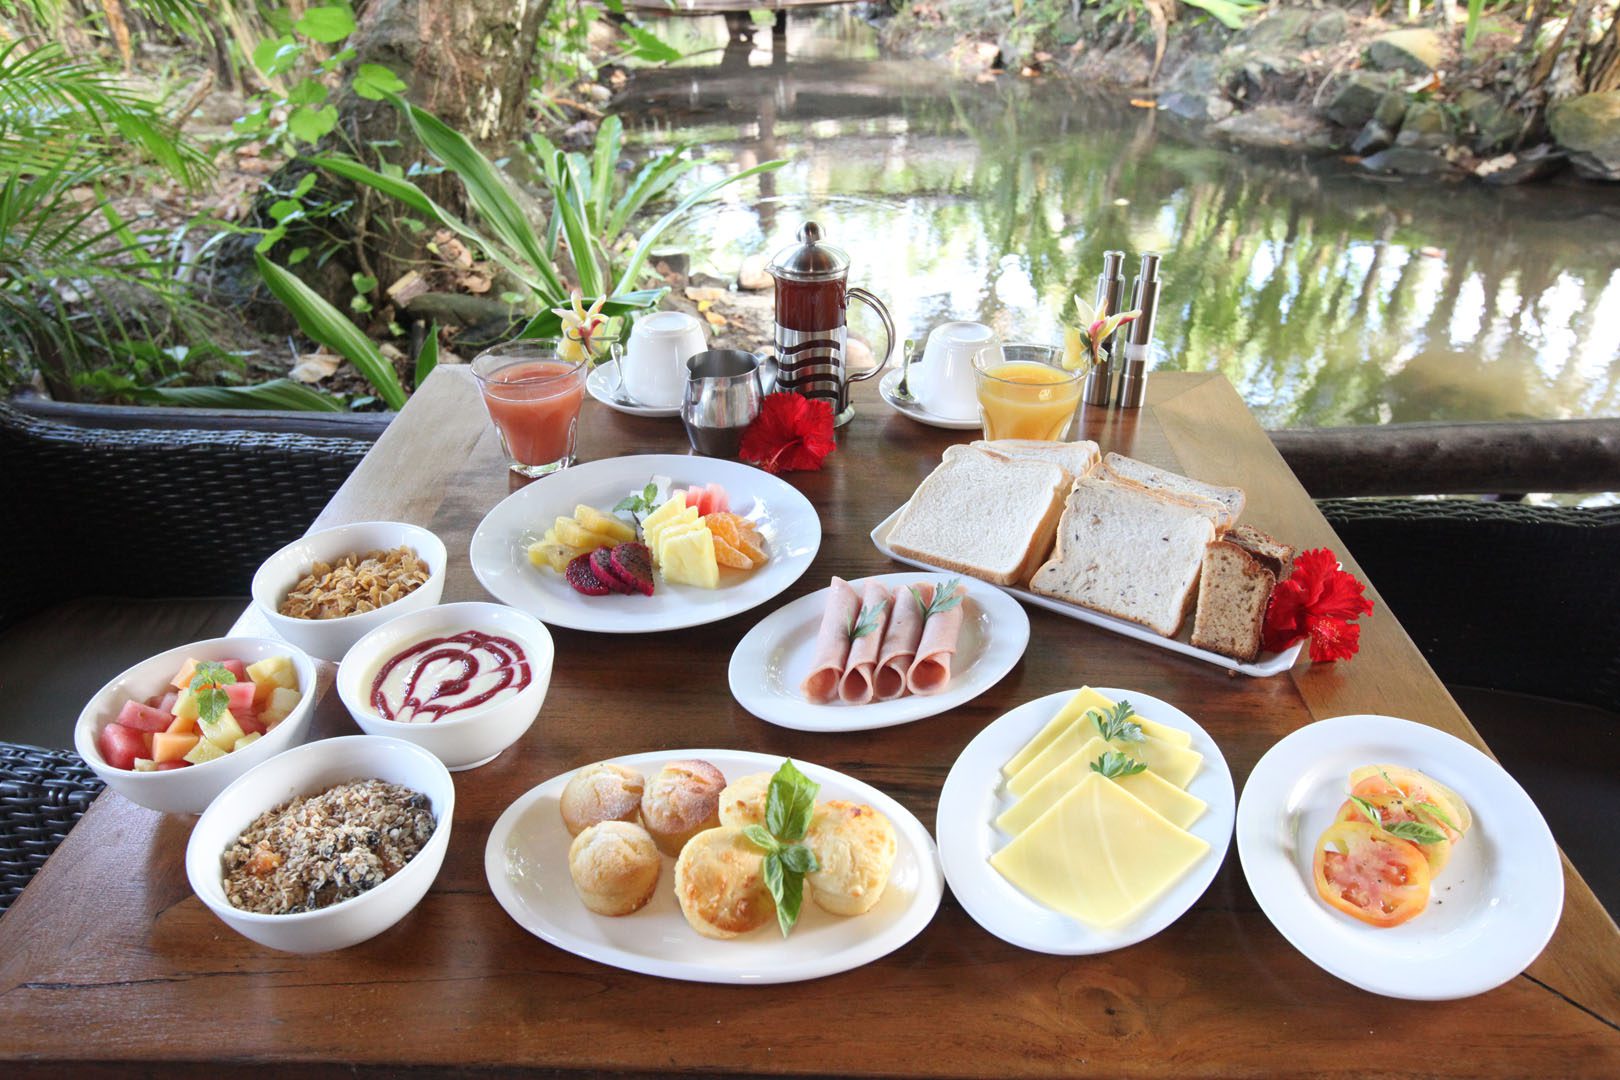 A delicious tropical continental breakfast selection set up featuring variety of breads, pastries, tropical fruits, ham and cheese along with a selection of coffee, tea and fruit juice